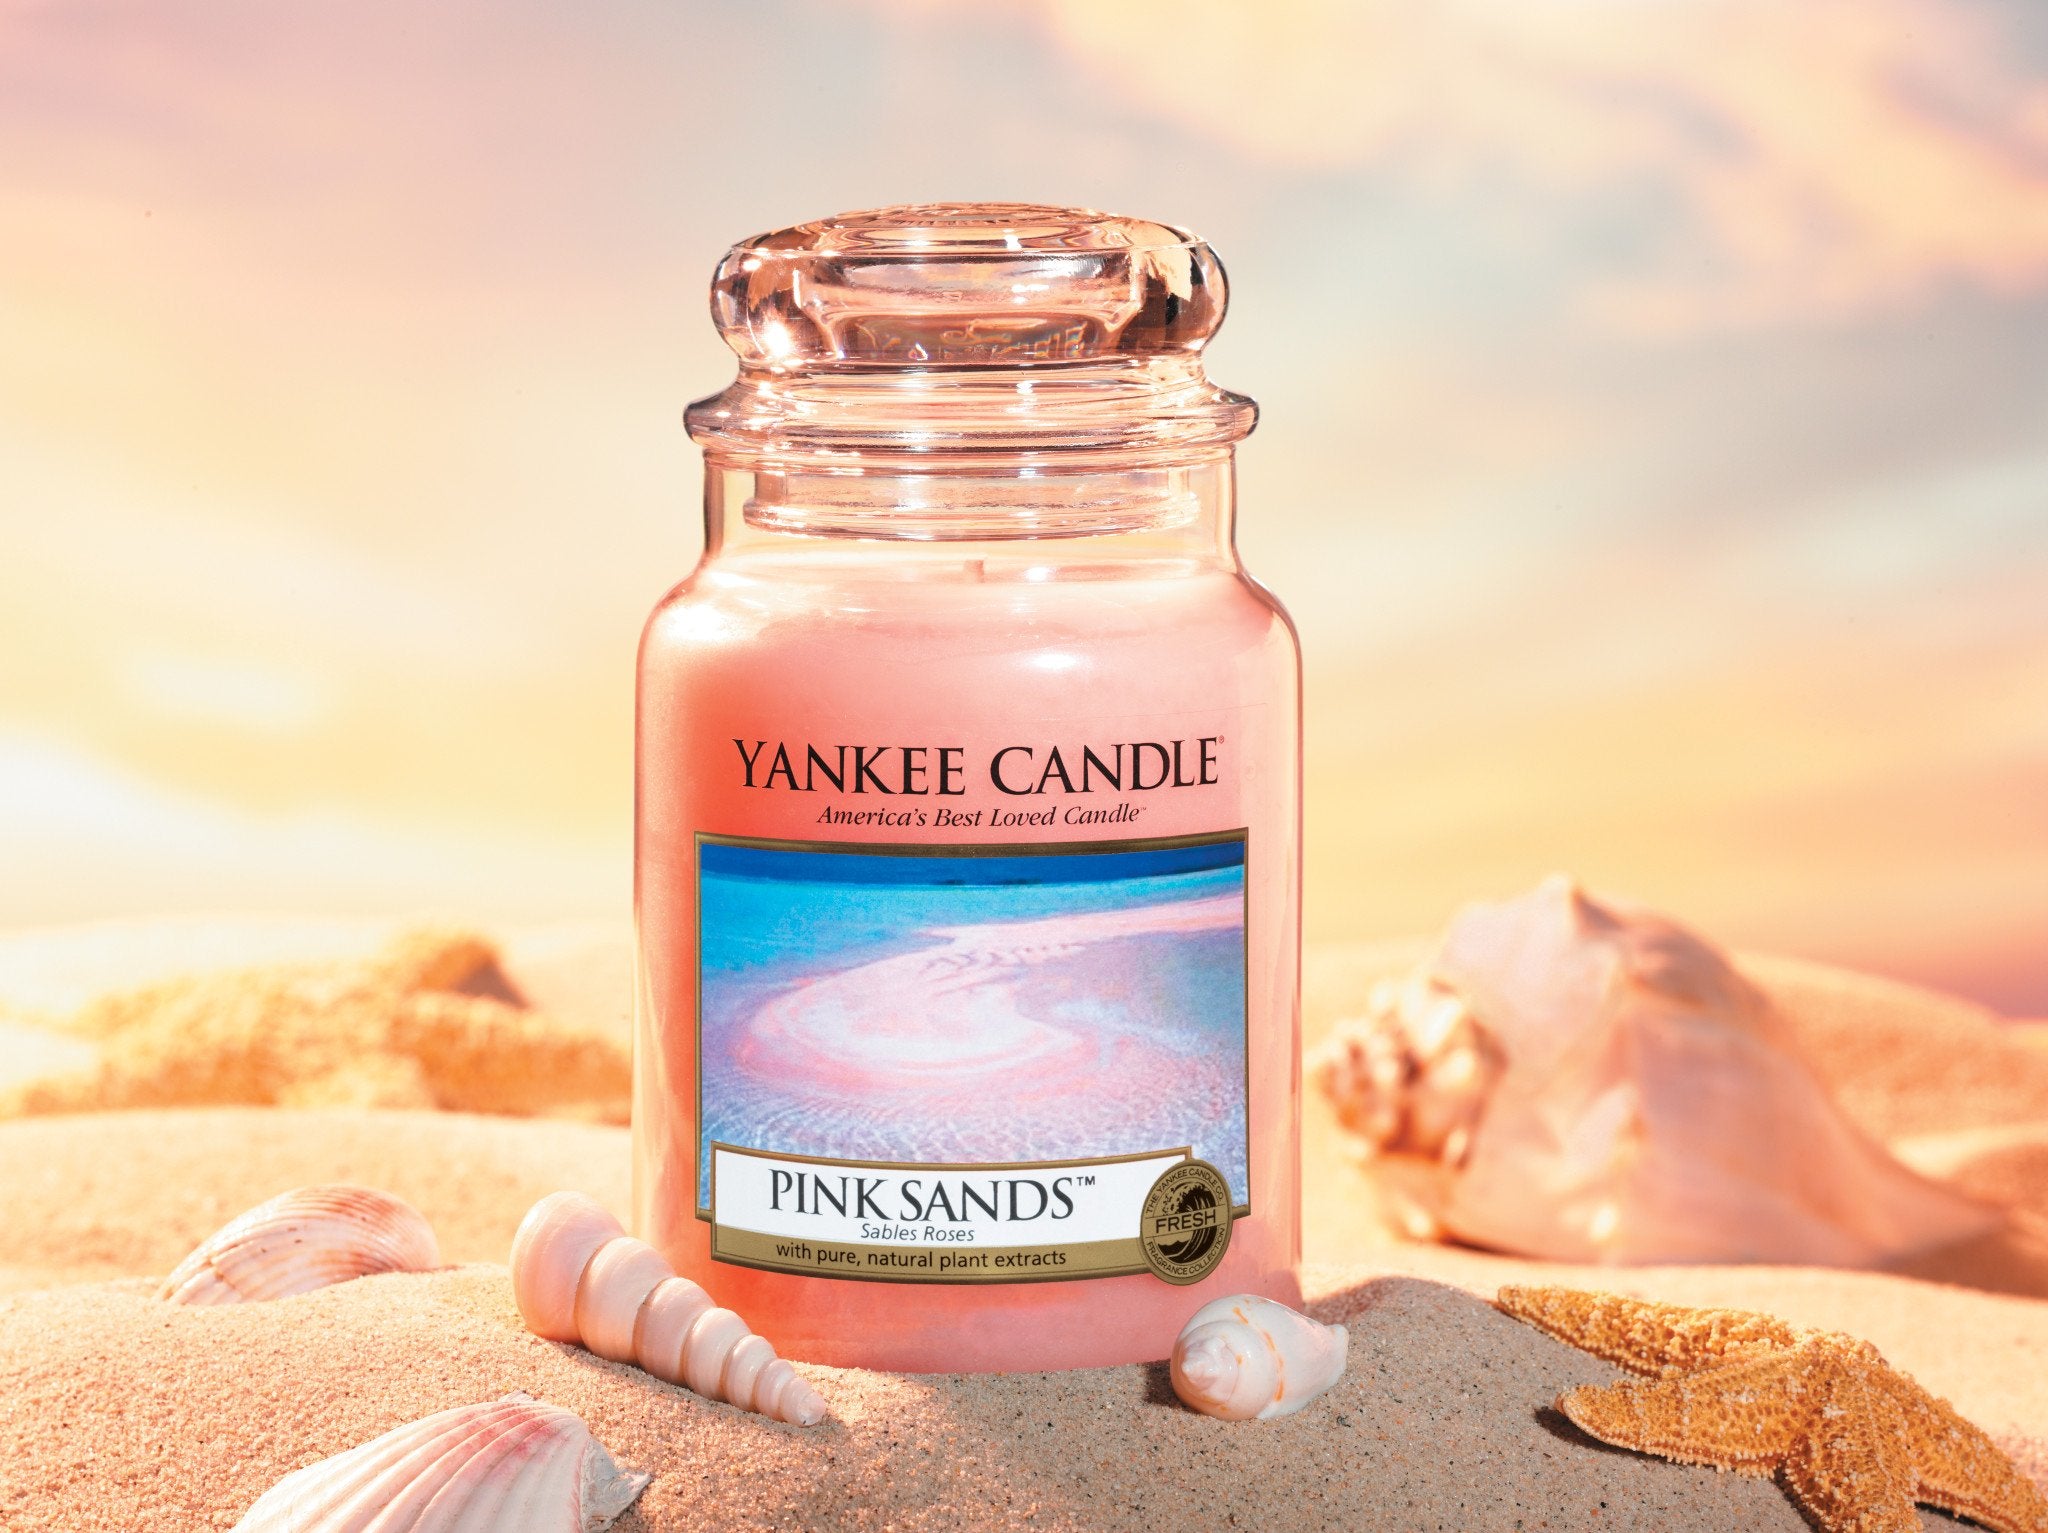 Pink sands - Yankee Candle - Candela Votive in Vetro – Candle With Care